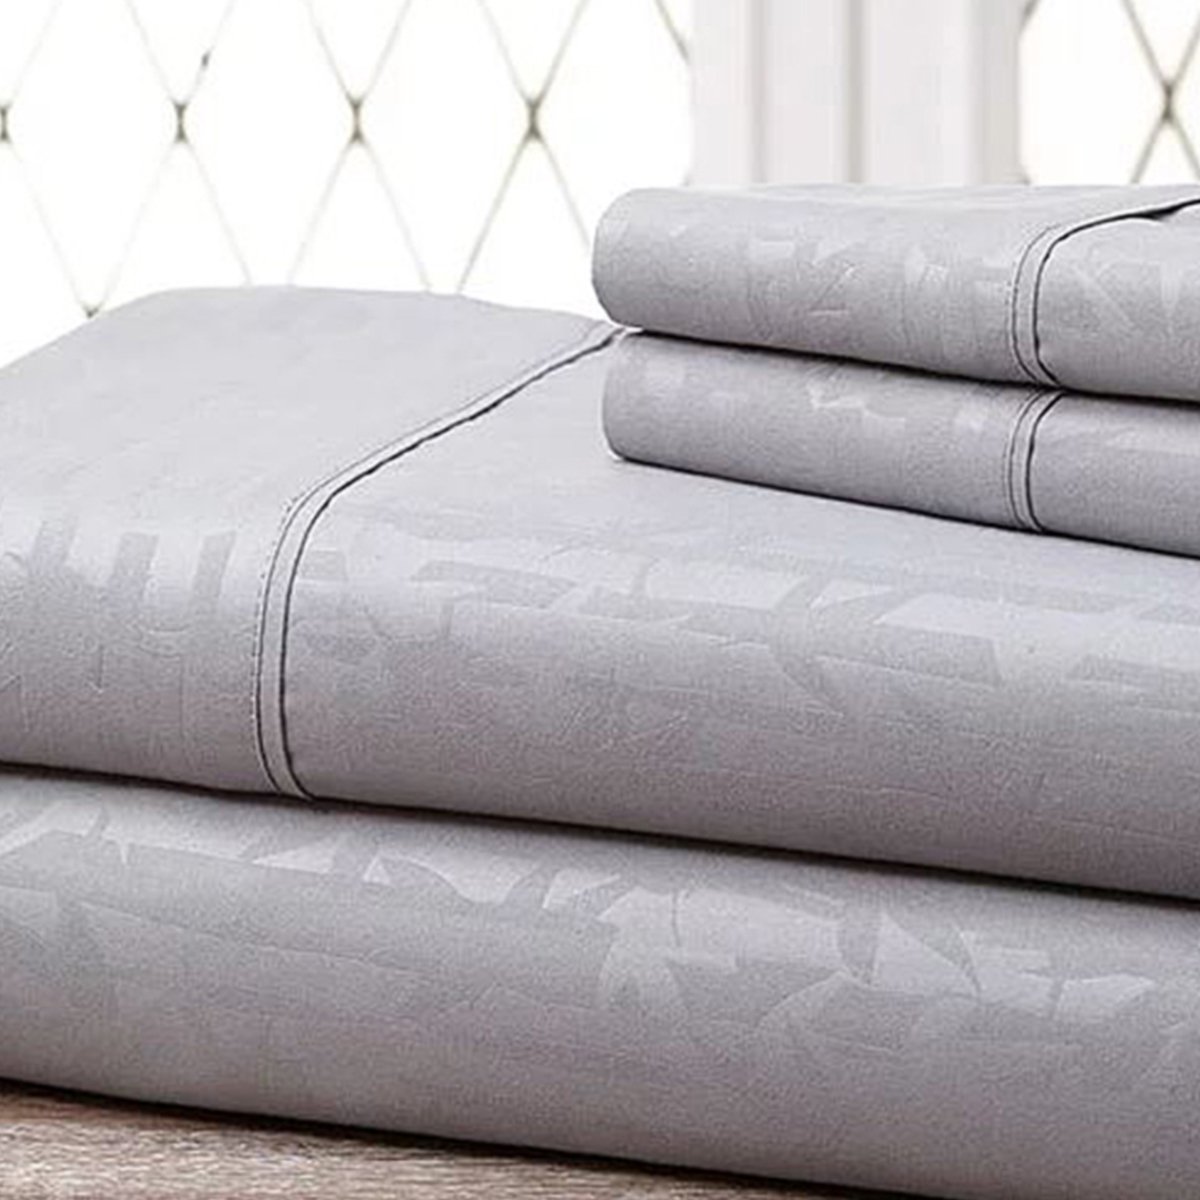 Super-soft 1600 Series Bamboo Embossed Bed Sheet, Gray - King, 4 Piece